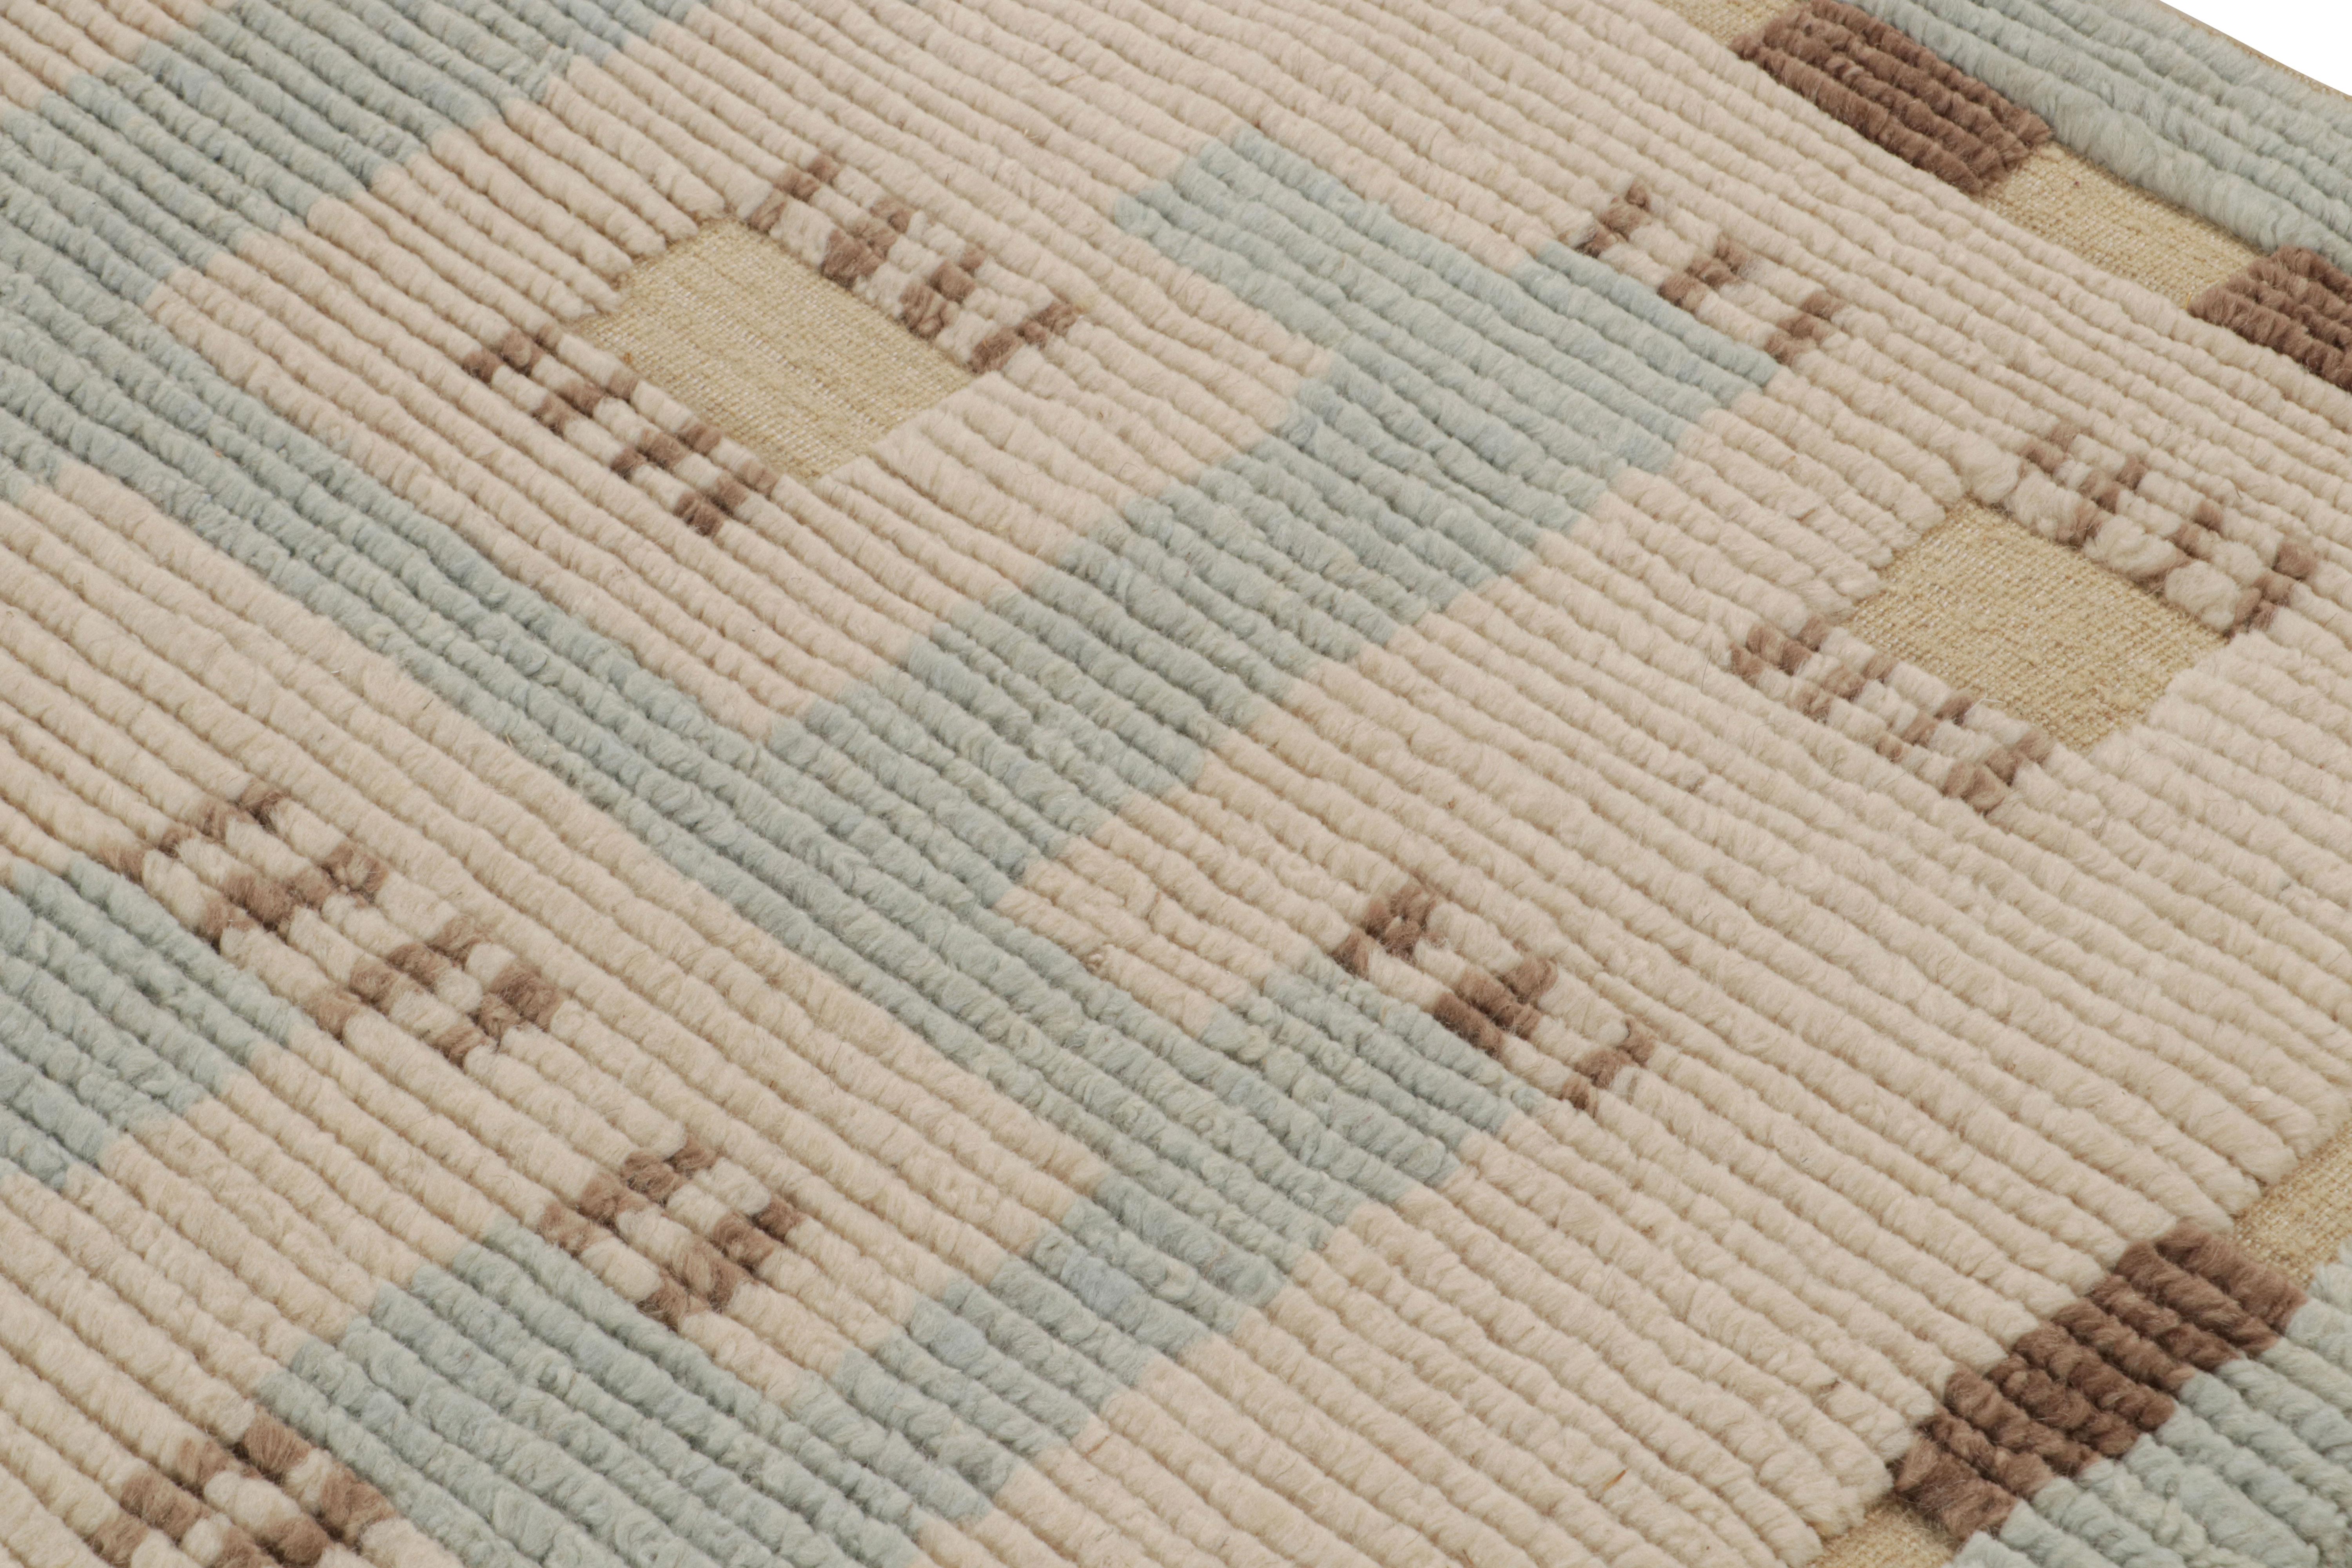 Indian Rug & Kilim’s “High” Scandinavian Style Rug with Blue and Beige Geometric For Sale